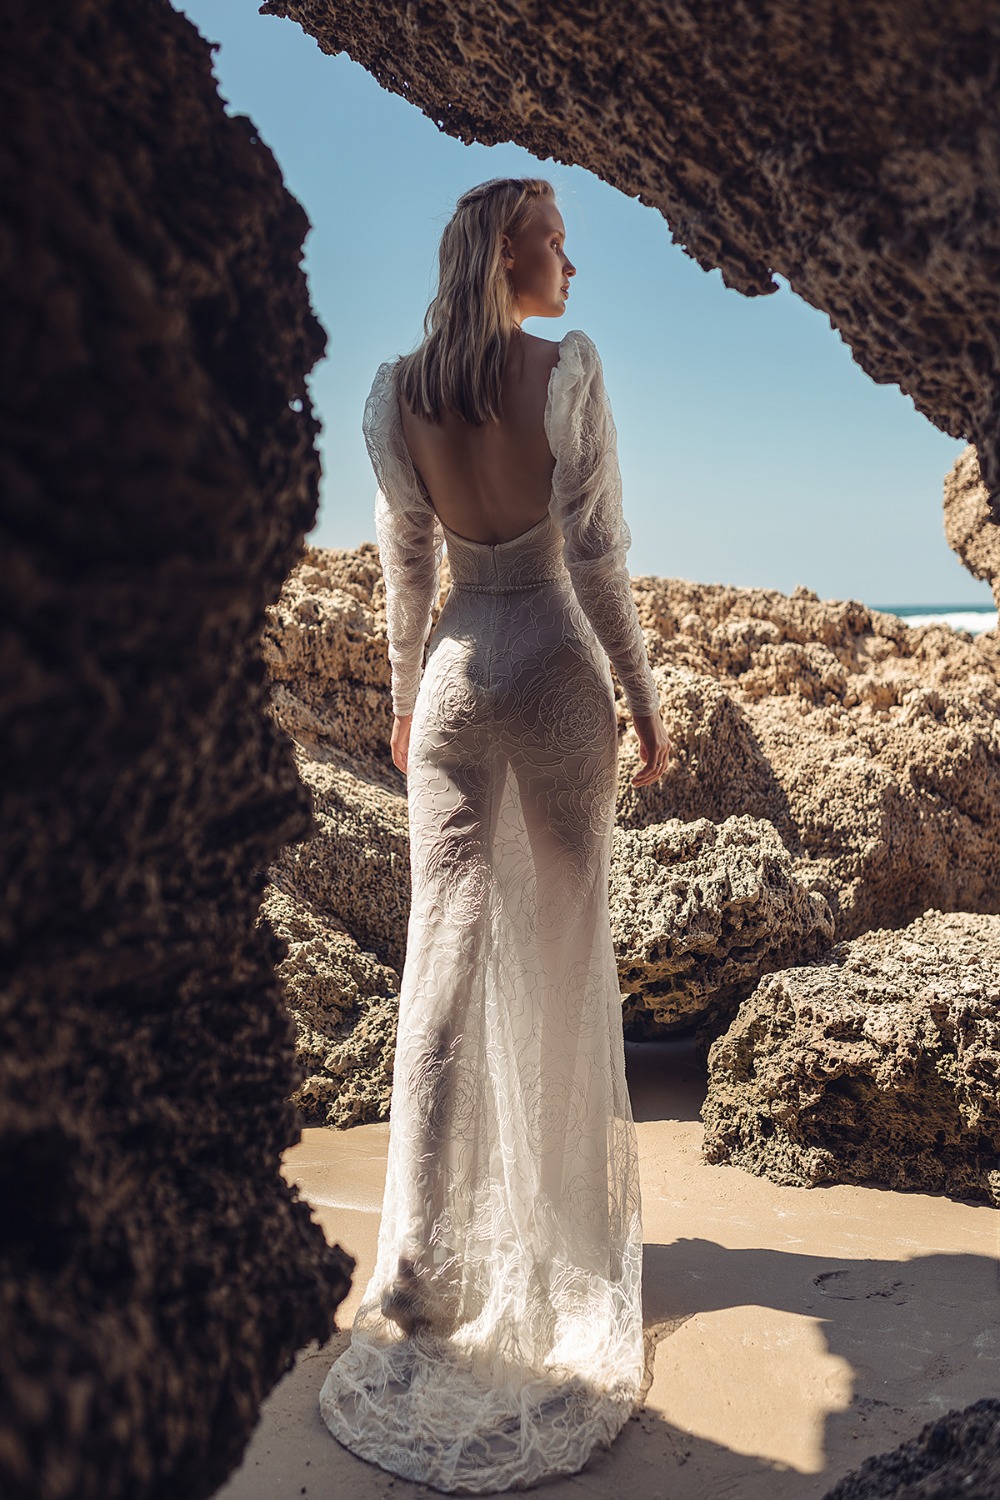 backless gown with dramatic puffed sleeves by Lilium